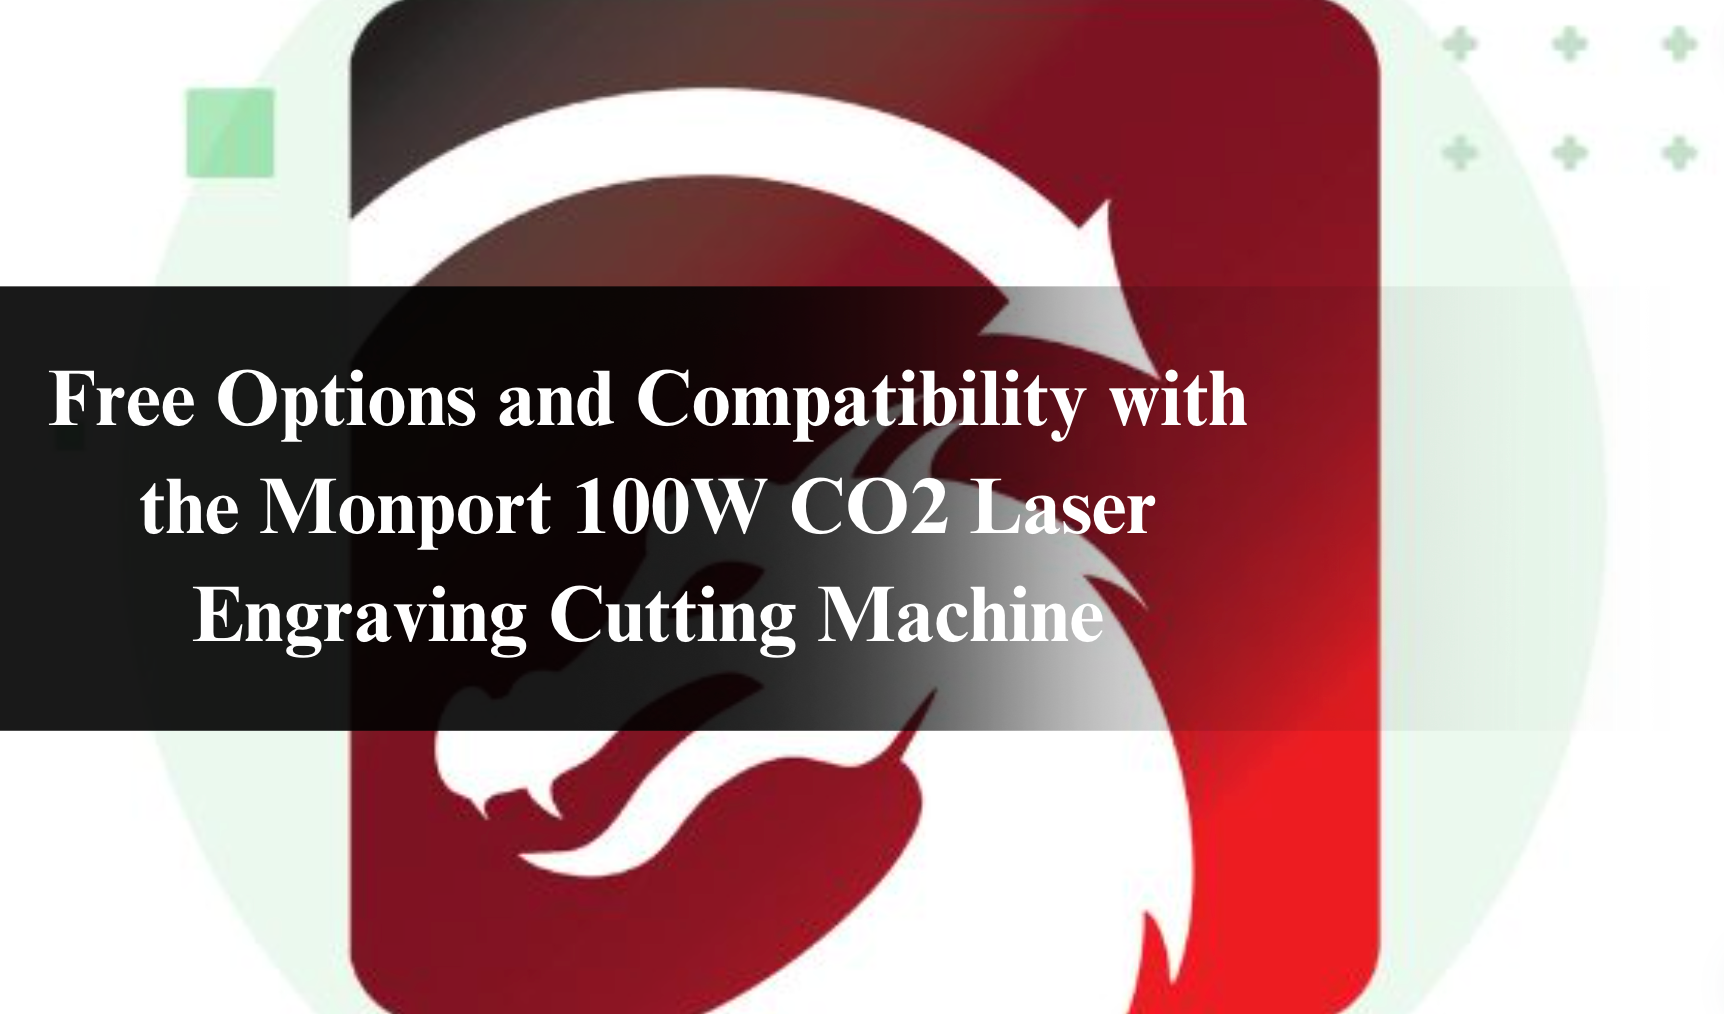 Free Options and Compatibility with the Monport 100W CO2 Laser Engraving Cutting Machine